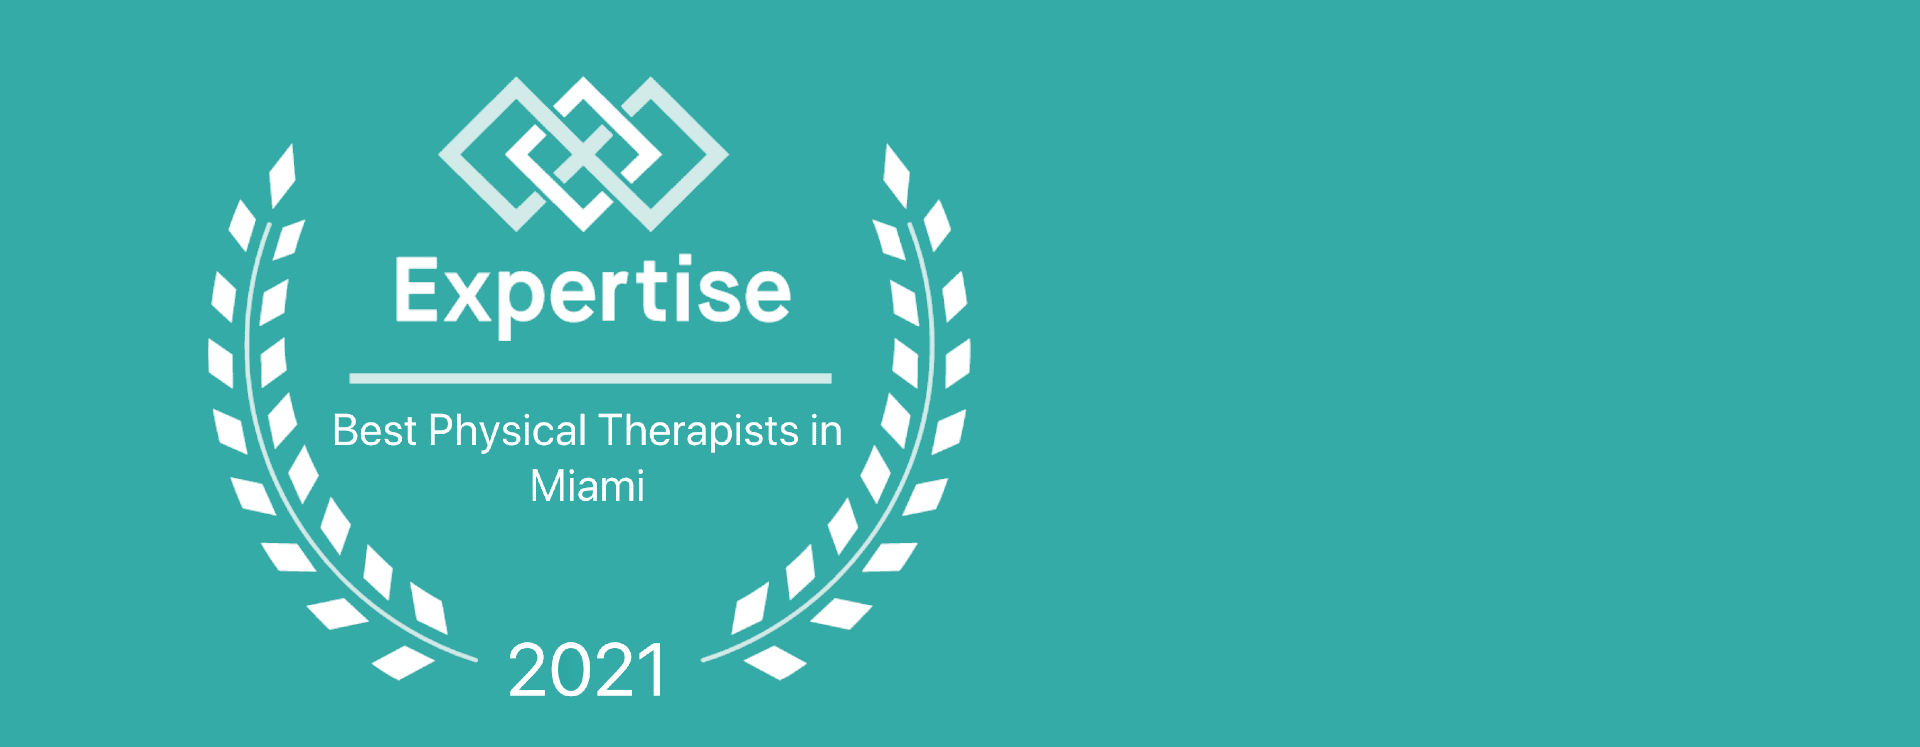 BEST<br>PHYSICAL<br>THERAPISTS<br>IN MIAMI 2021